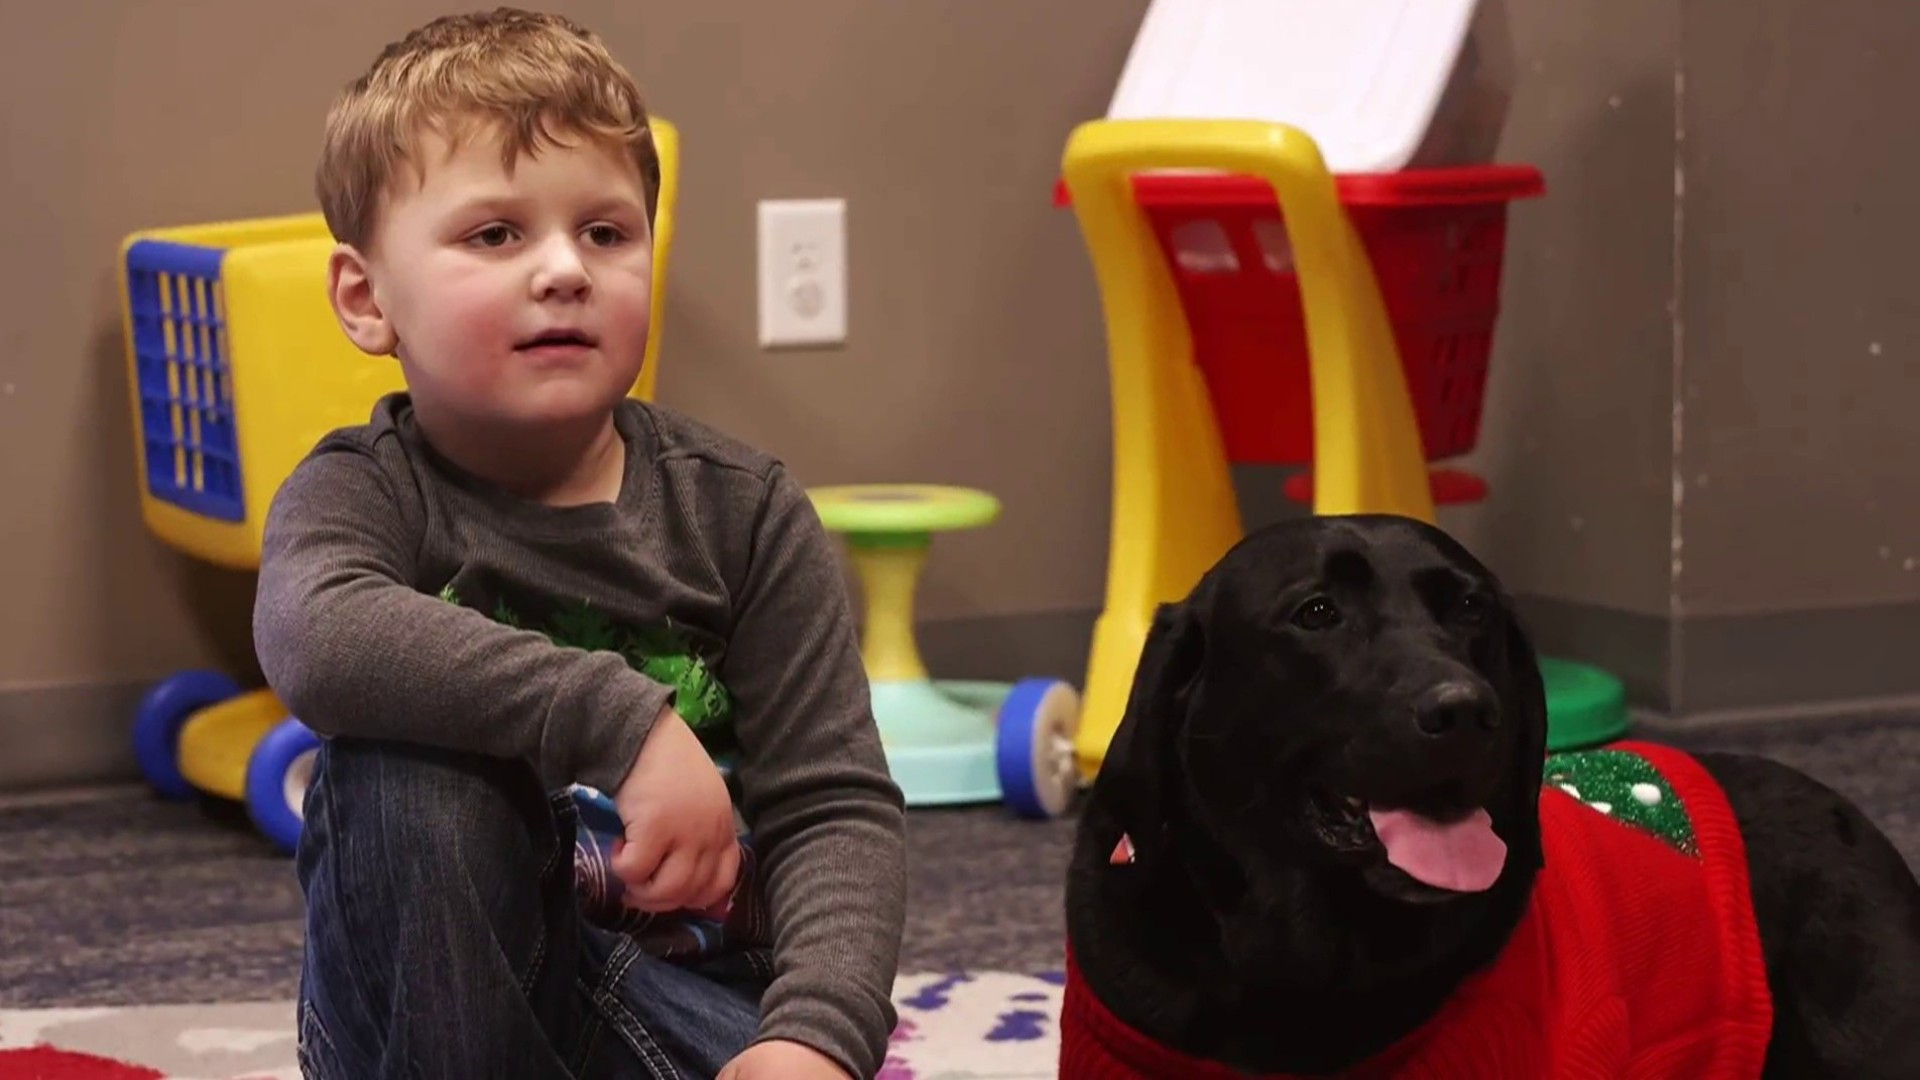 School with beloved therapy dog gets sweet holiday surprise